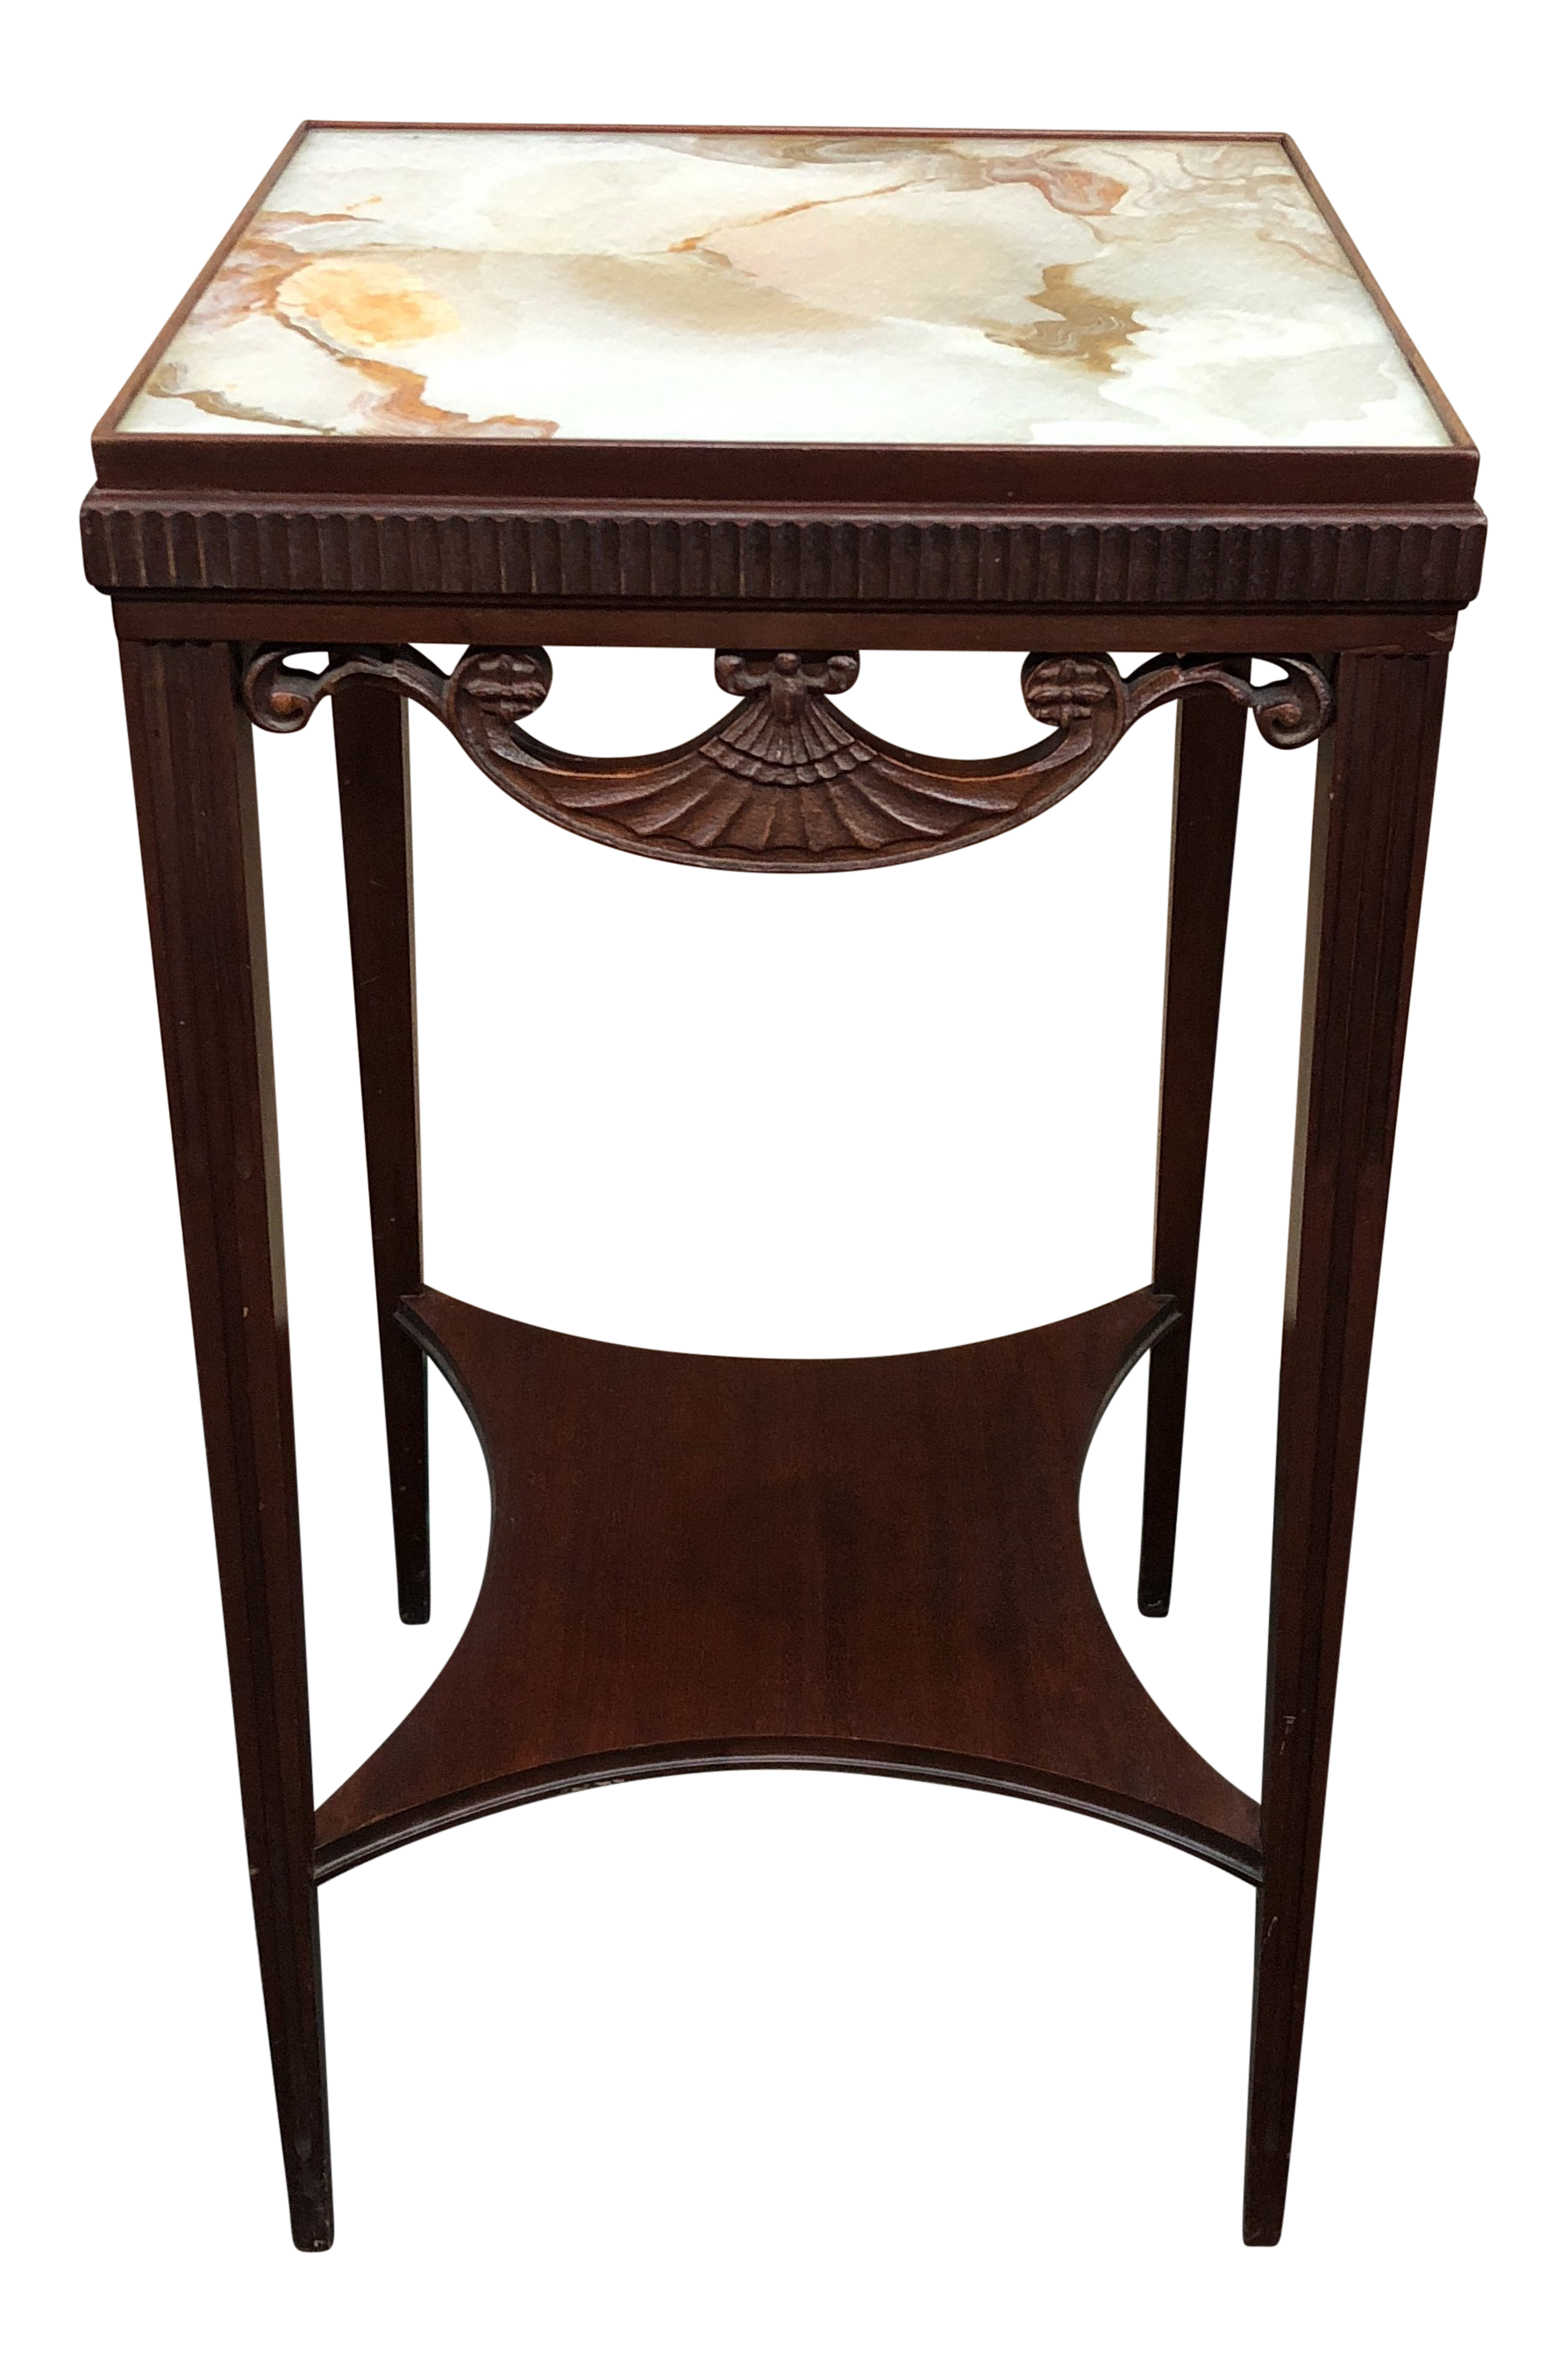 antique faux marble painted glass top accent table chairish oval outdoor coffee restaurant brown patio side cream colored nightstand counter height bar small kitchen and chairs